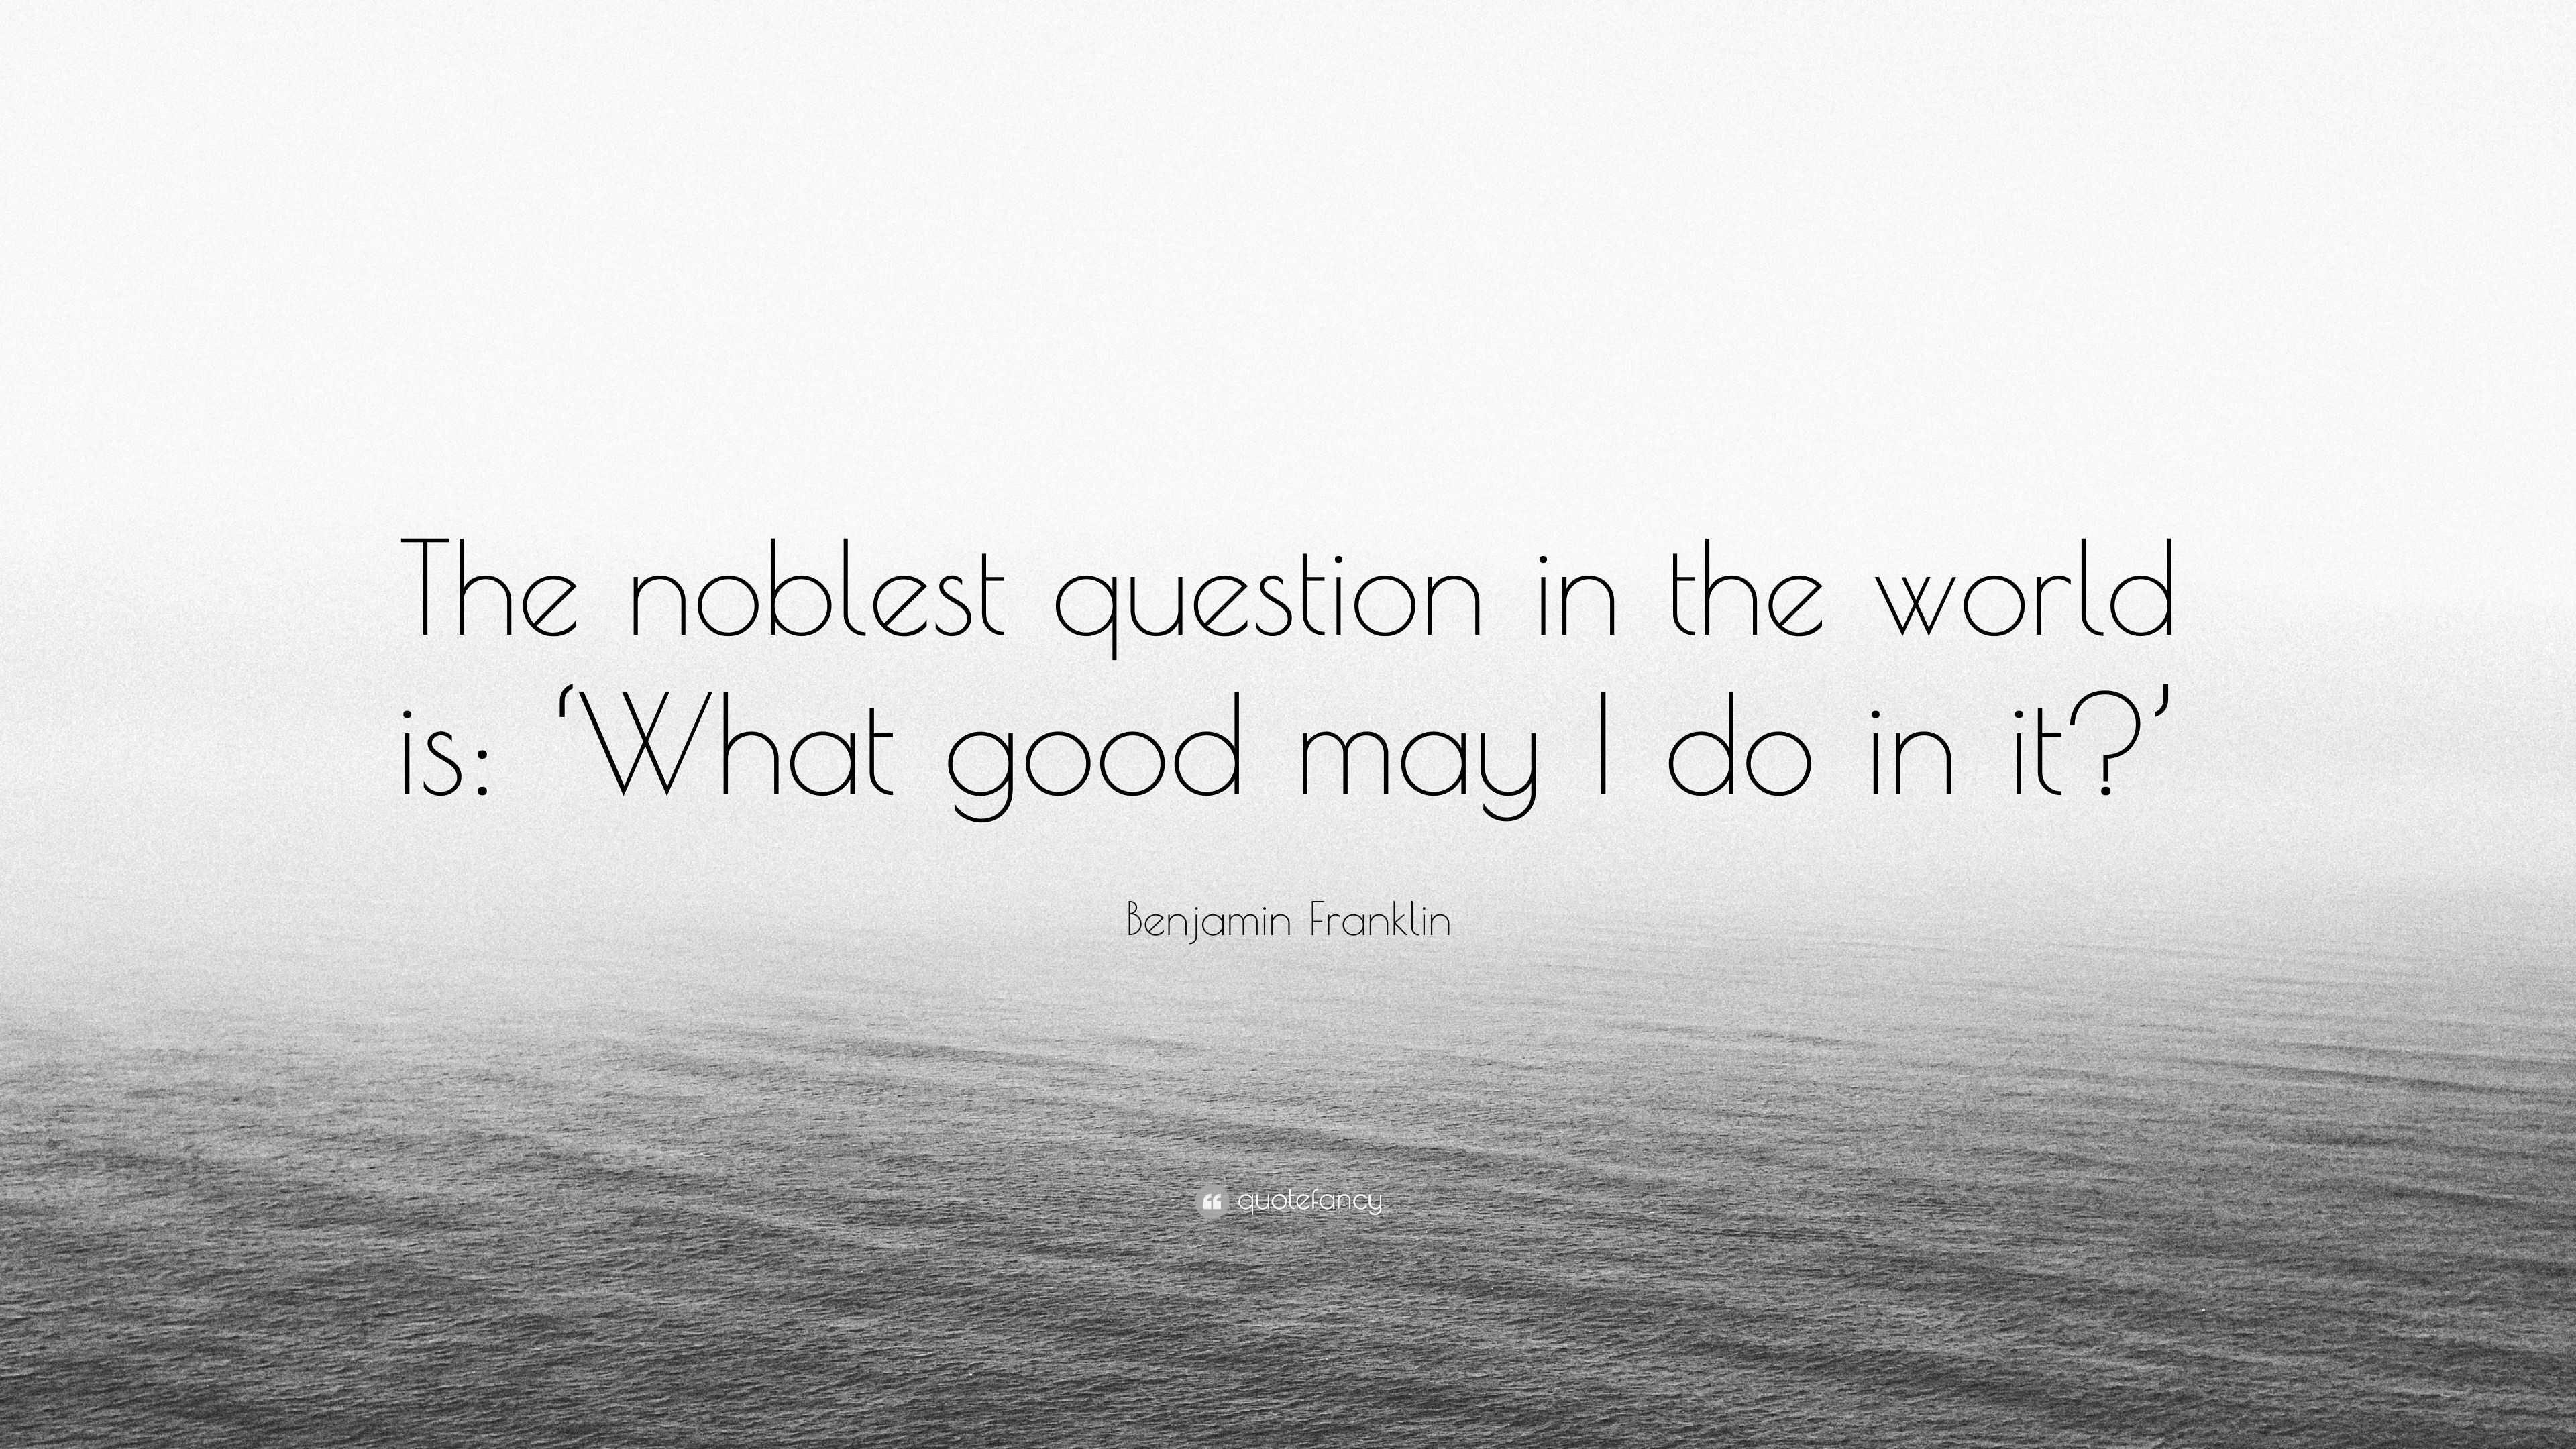 Benjamin Franklin Said This Is the Noblest Question in the World (It's Only  7 Words)